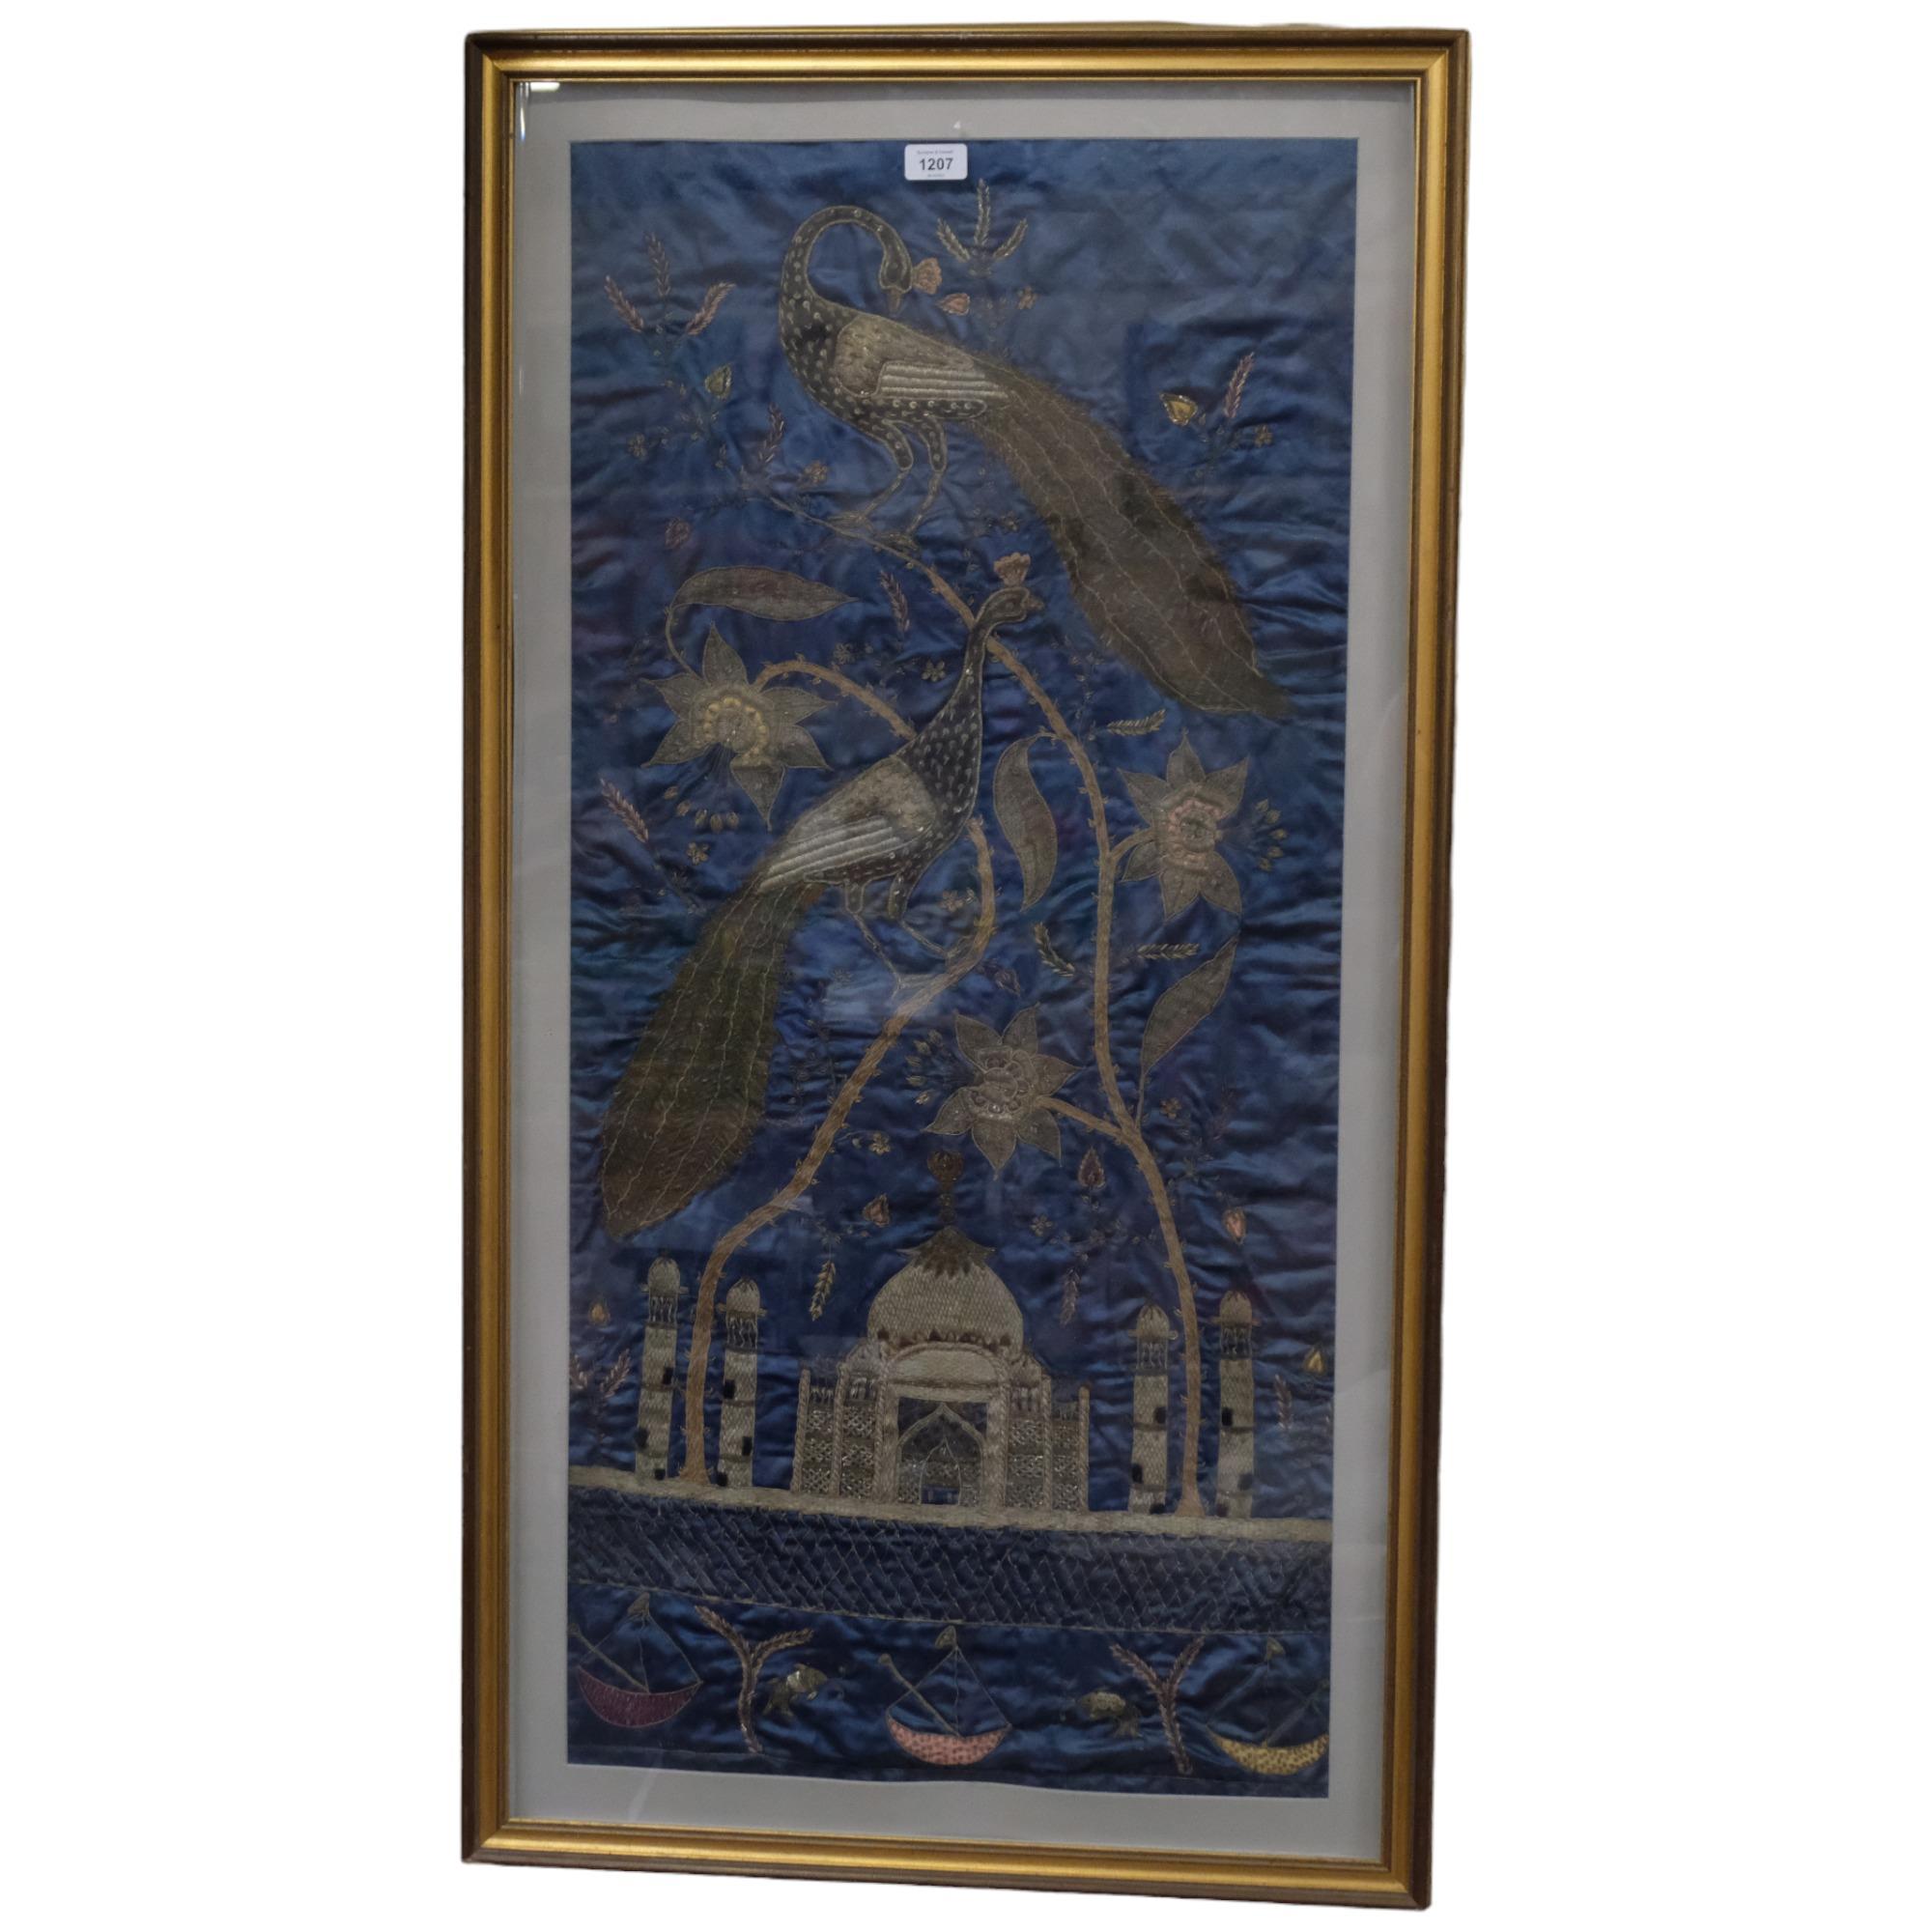 Late 19th century Indian silver braid embroidered picture, depicting peacocks and roses with